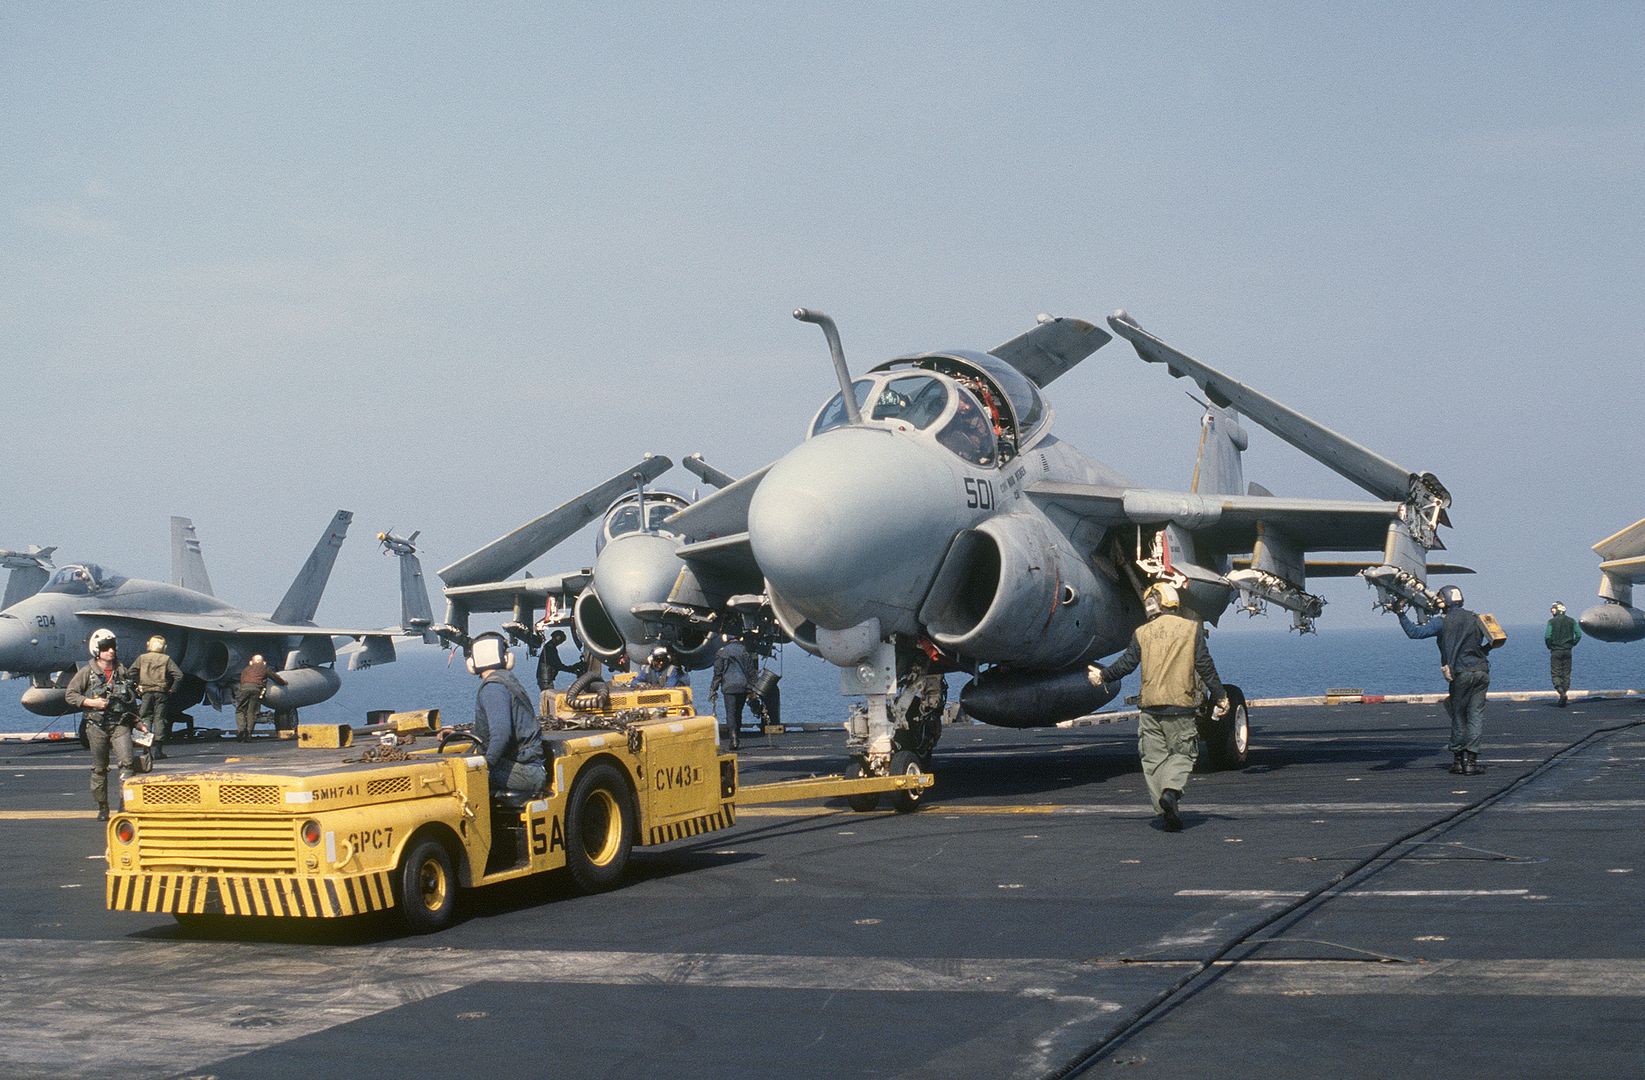 An MD 3A Tow Tractor Is Used To Park An A 6E Intruder Aircraft On The Flight Deck Aboard The Aircraft Carrier USS CORAL SEA During Flight Operations Off The Coast Of Libya